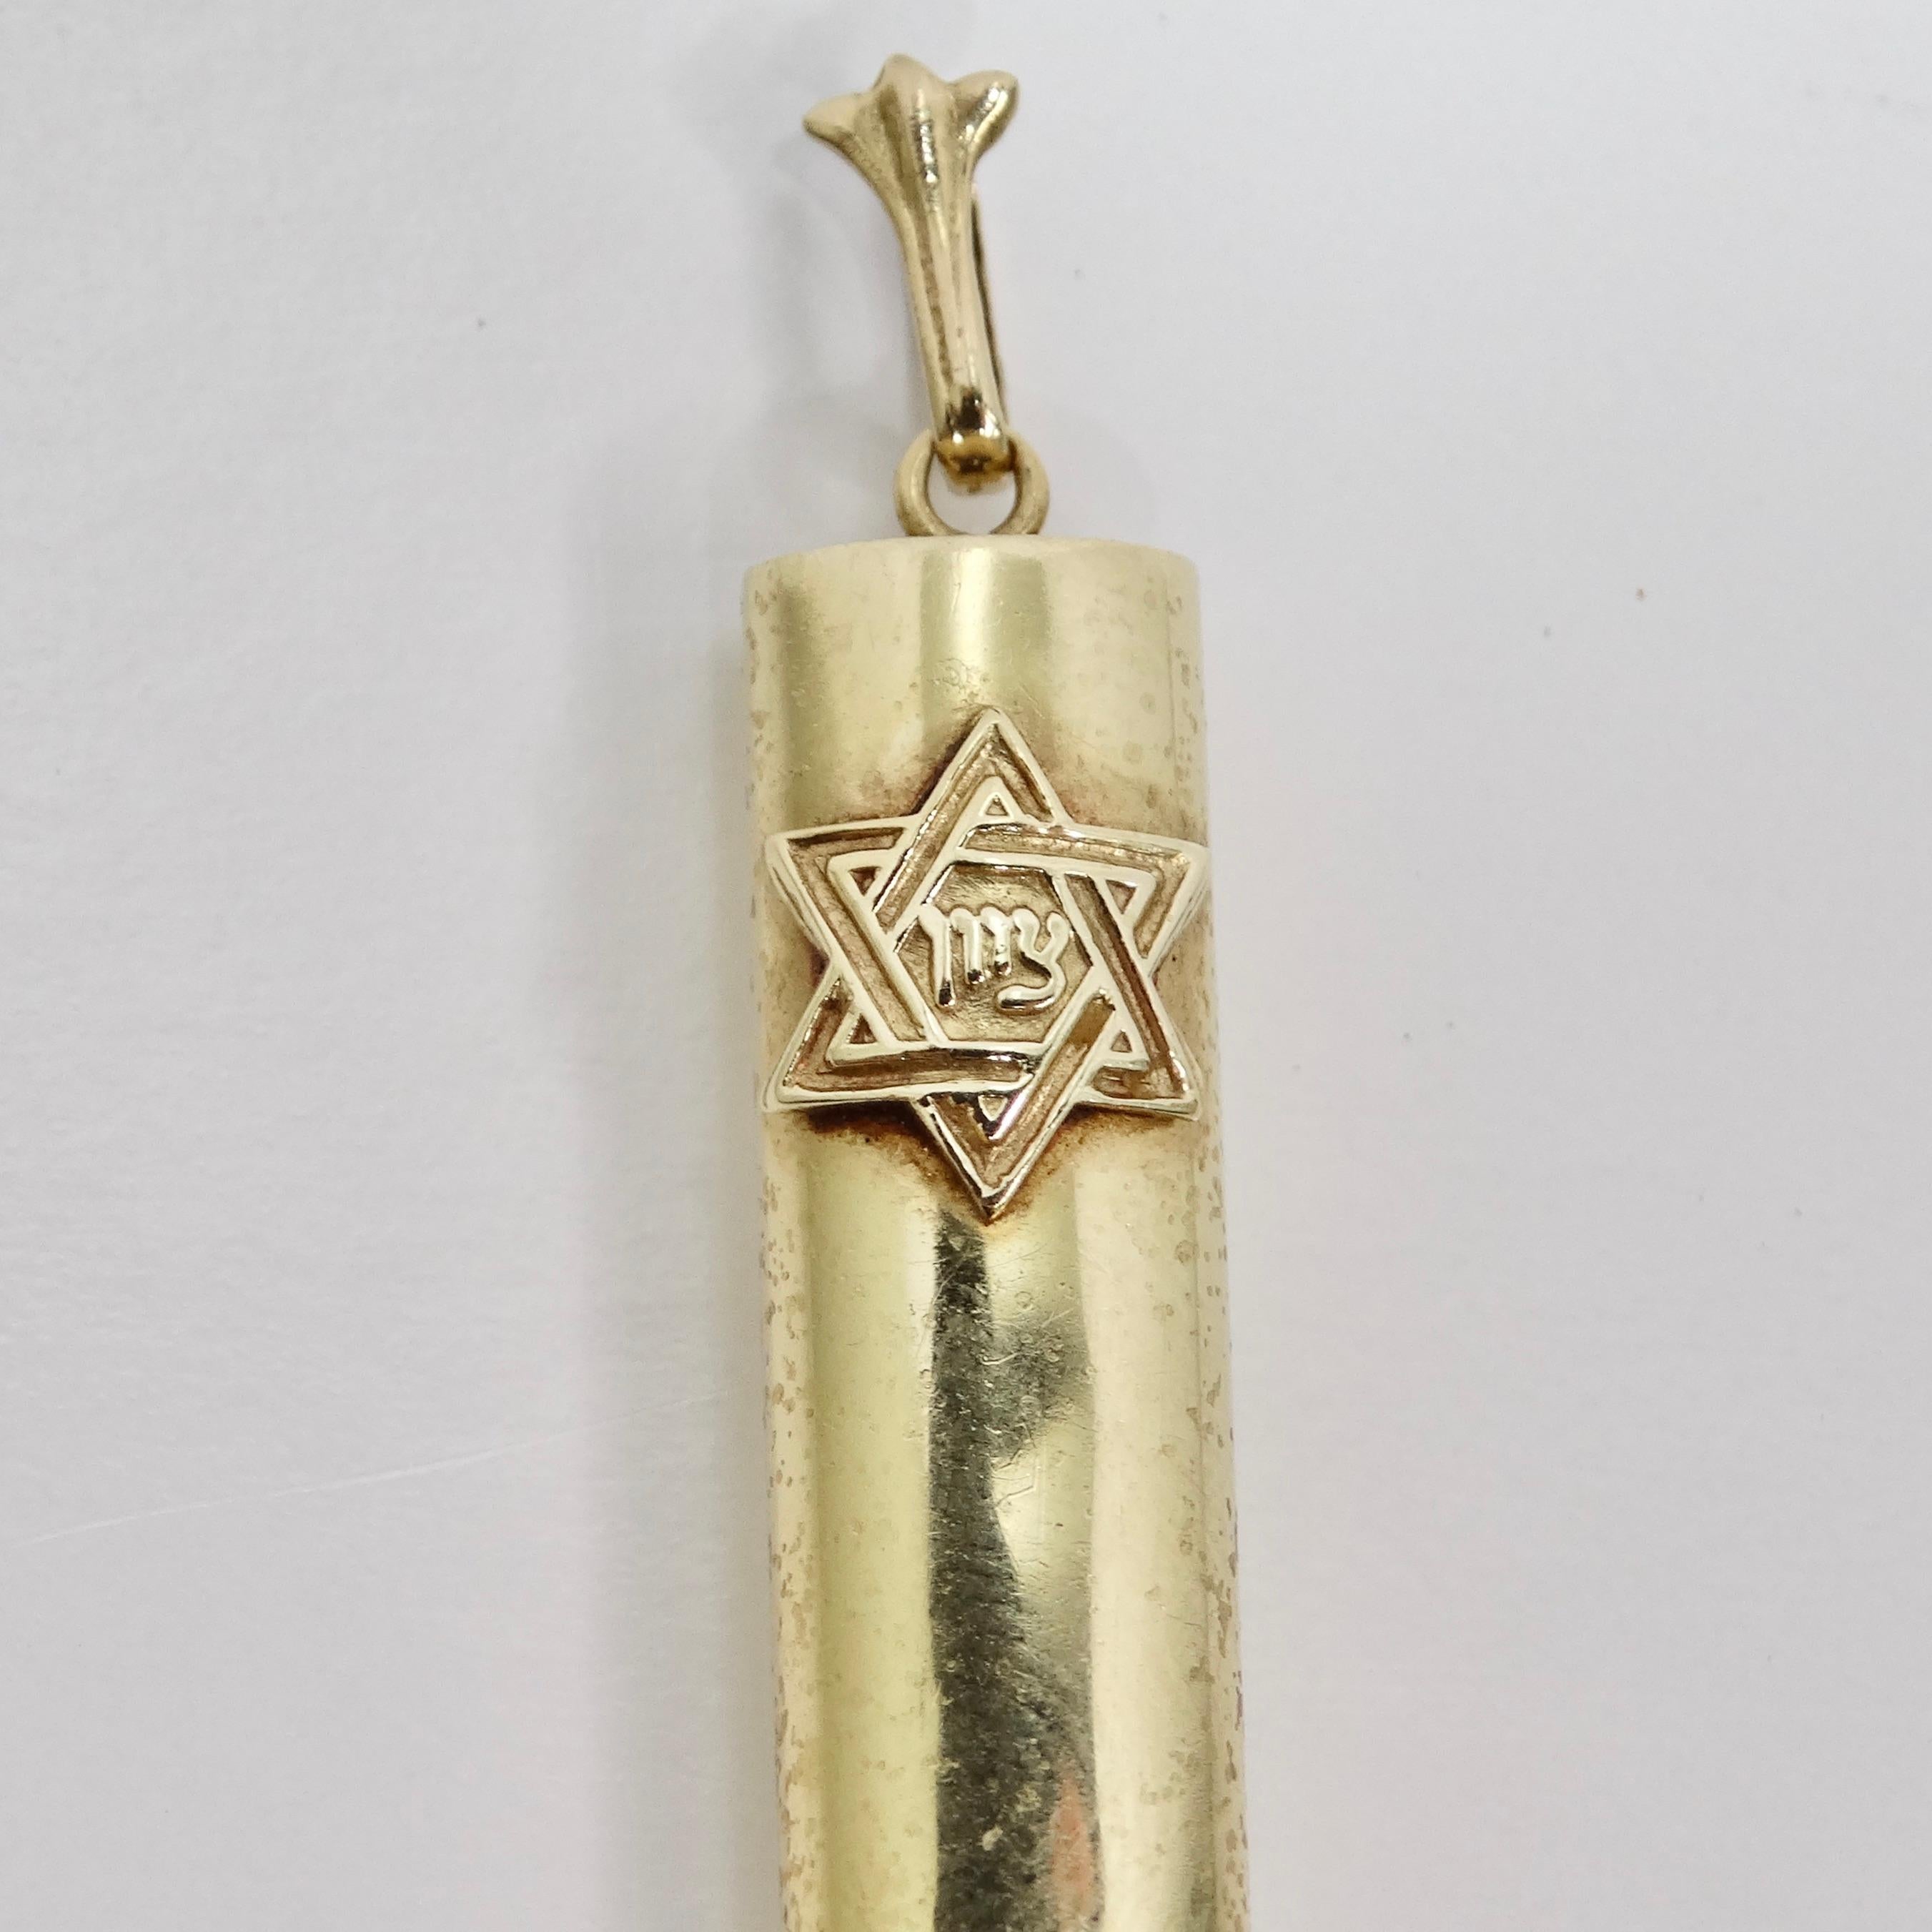 Experience the timeless beauty of this 14K Gold 1960s Star of David Pendant, a meaningful piece that captures tradition and elegance. Crafted from 14k yellow gold, this rectangular pendant is a beautiful expression of faith and heritage.

The